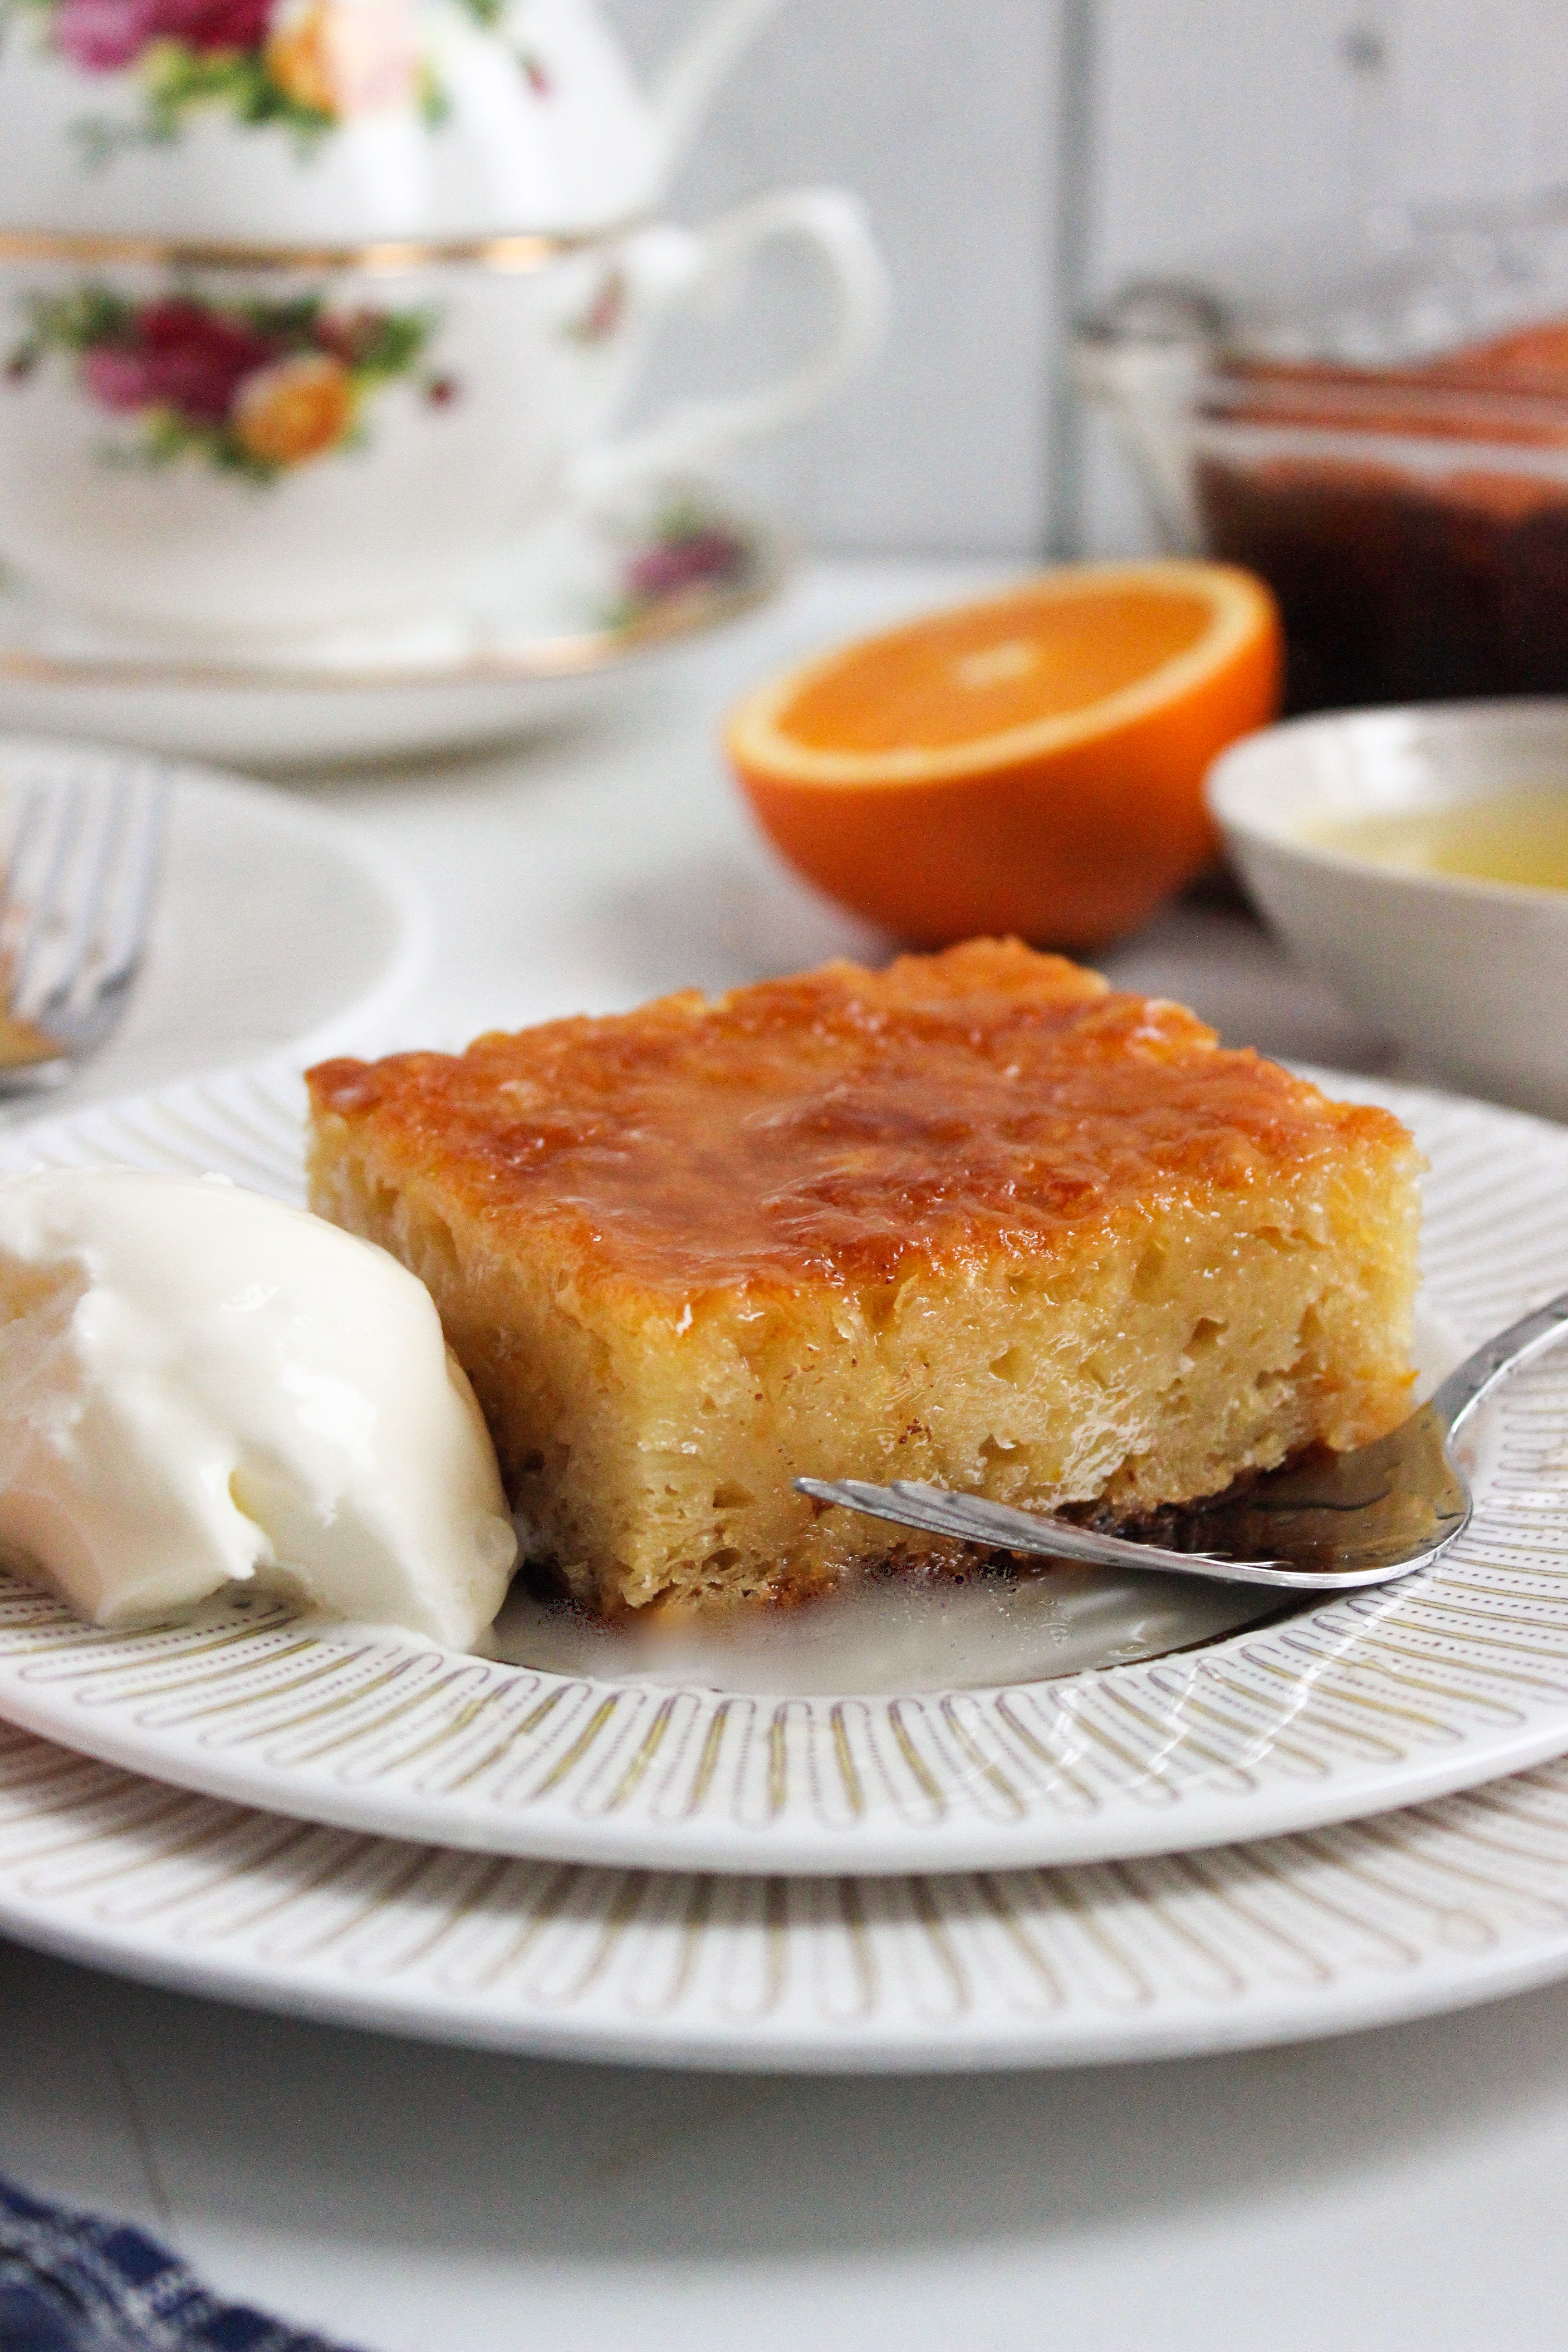 A syrup cake made with phyllo and infused with orange flavour